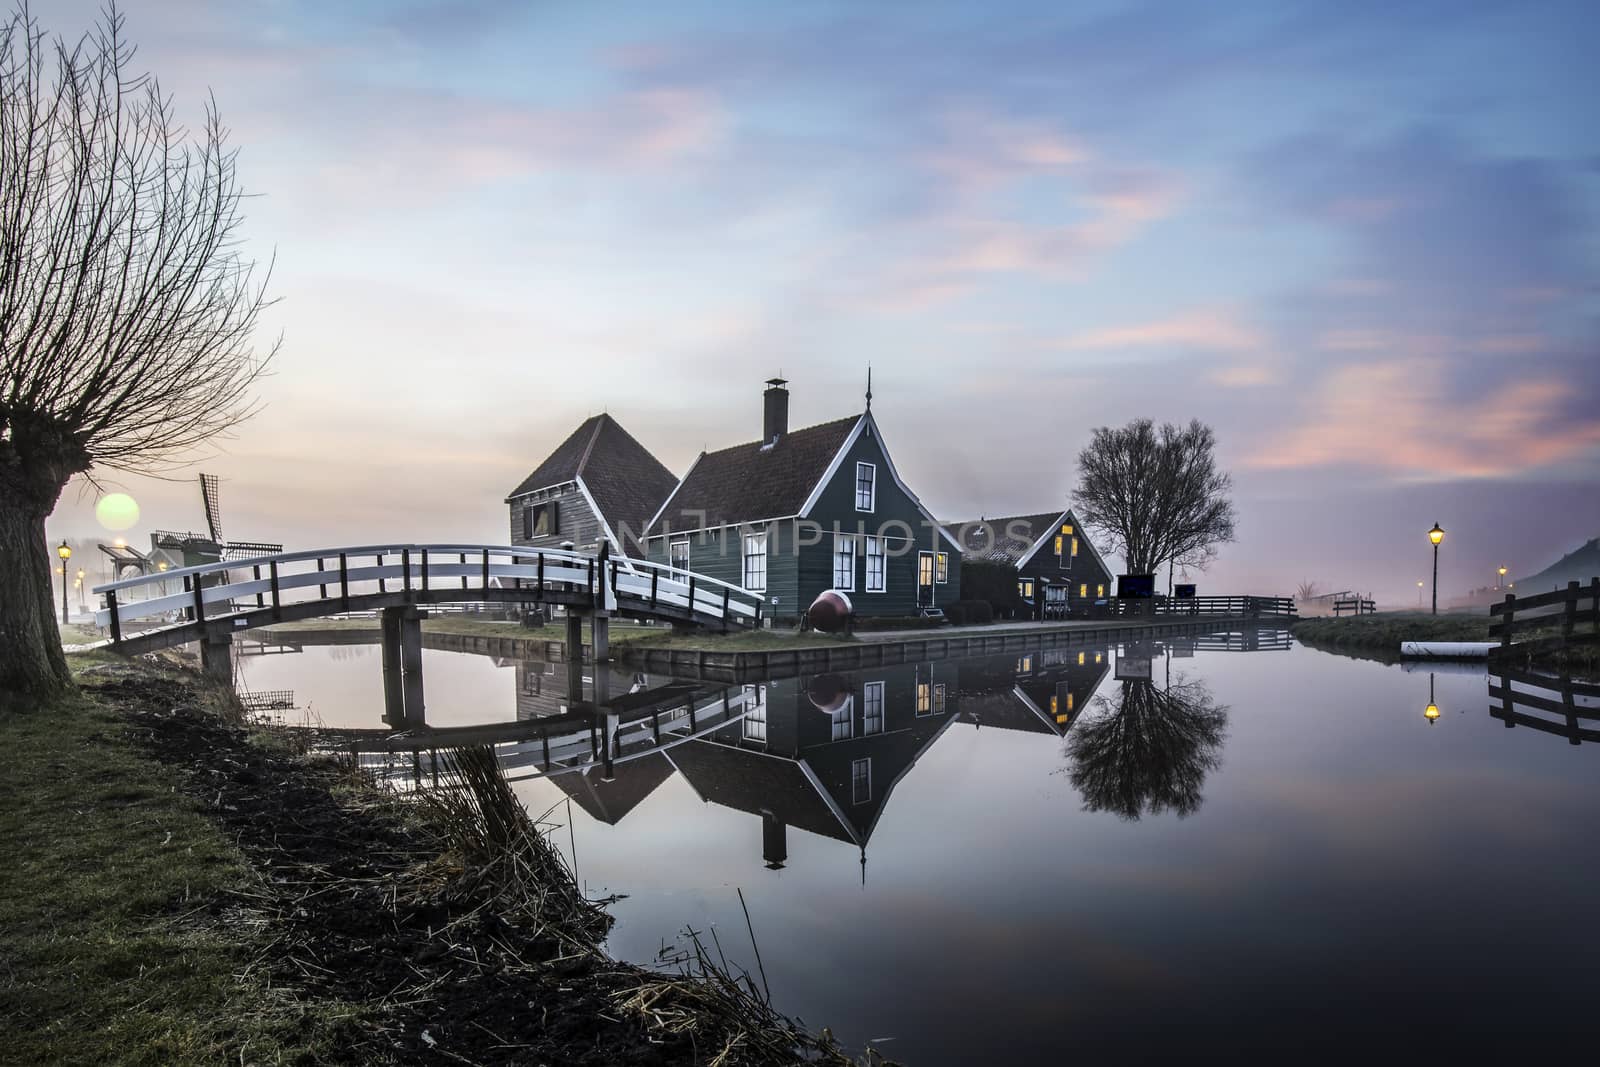 Beaucoutif typical Dutch wooden houses architecture mirrored on the calm canal of Zaanse Schans located at the North of Amsterdam, Netherlands by ankorlight